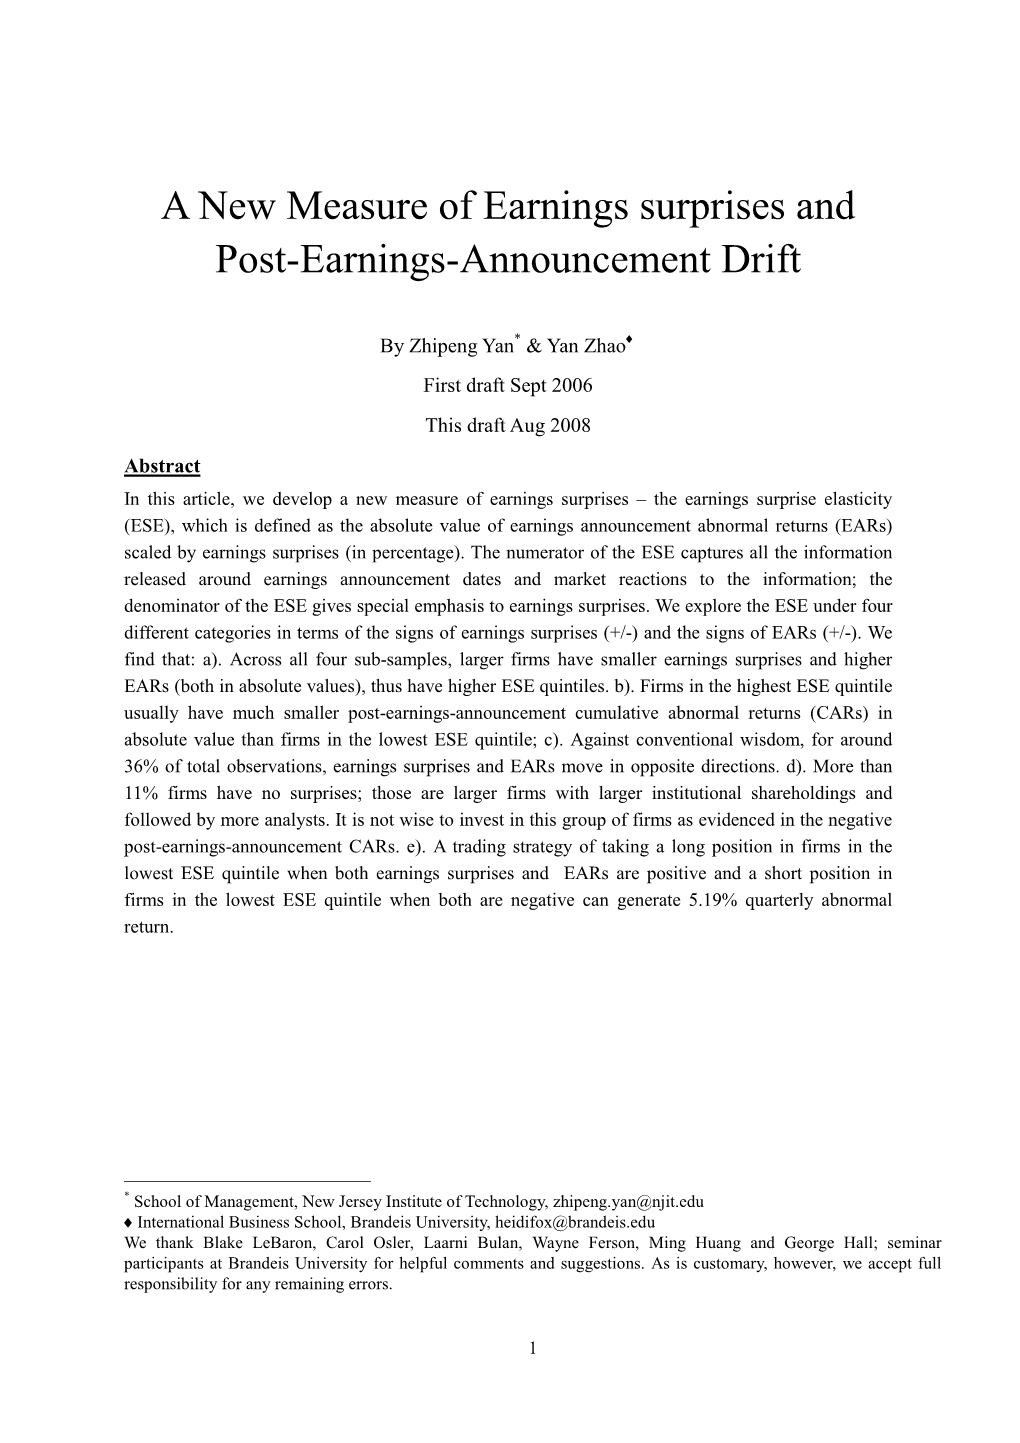 A New Measure of Earnings Surprises and Post-Earnings-Announcement Drift